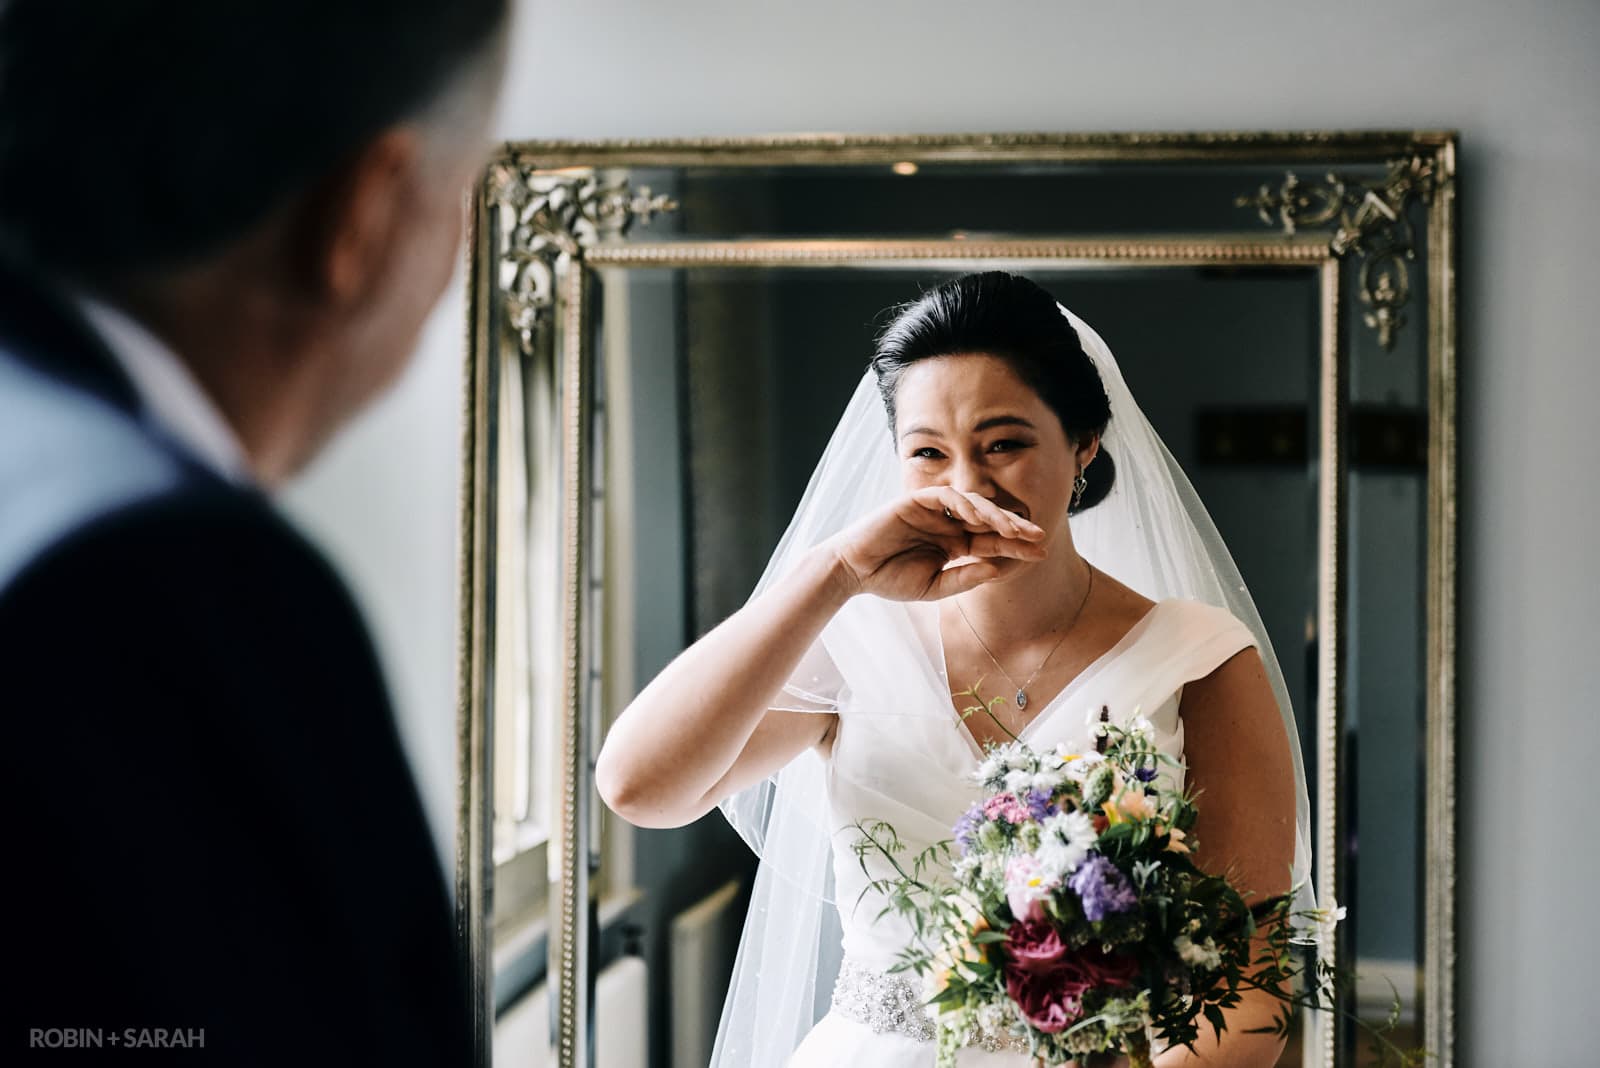 Bride emotional as father sees her in wedding dress